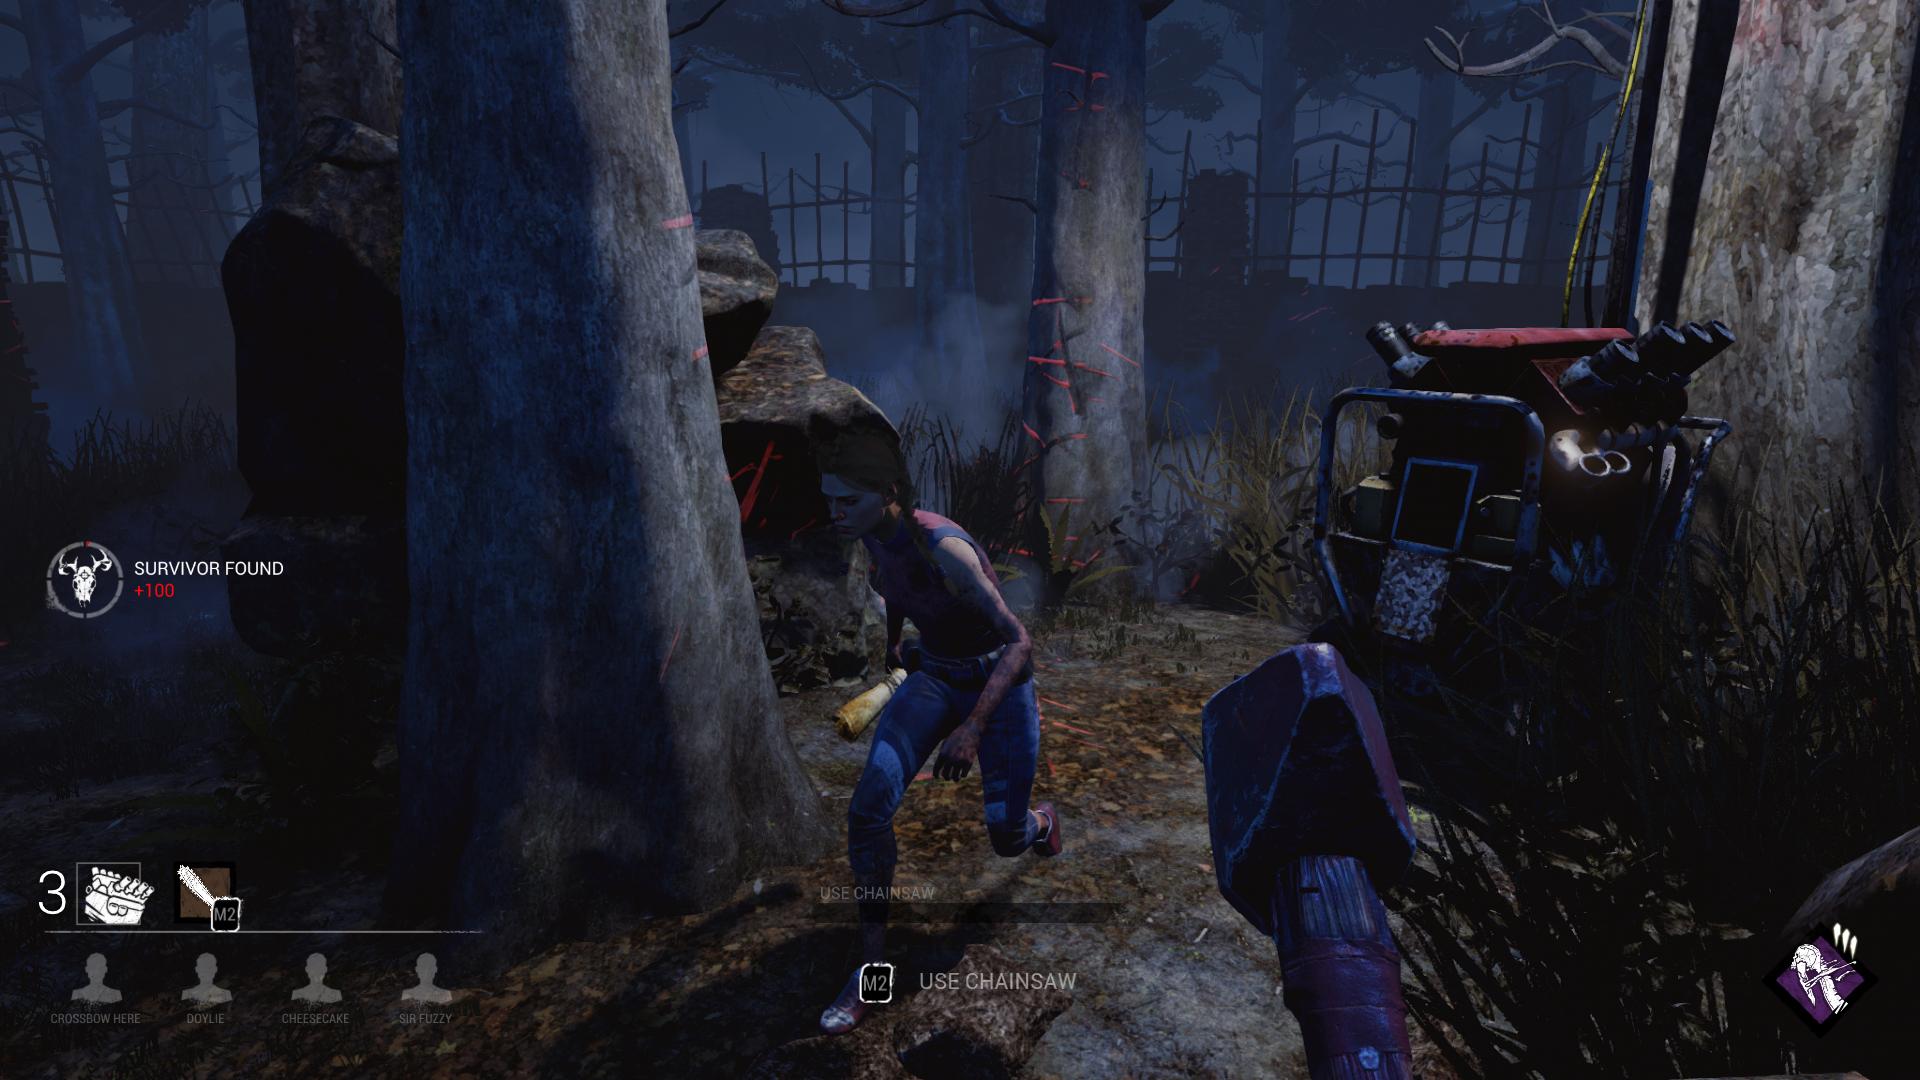 Kloster maske plads Dead by Daylight is getting cross-progression support - PC Invasion